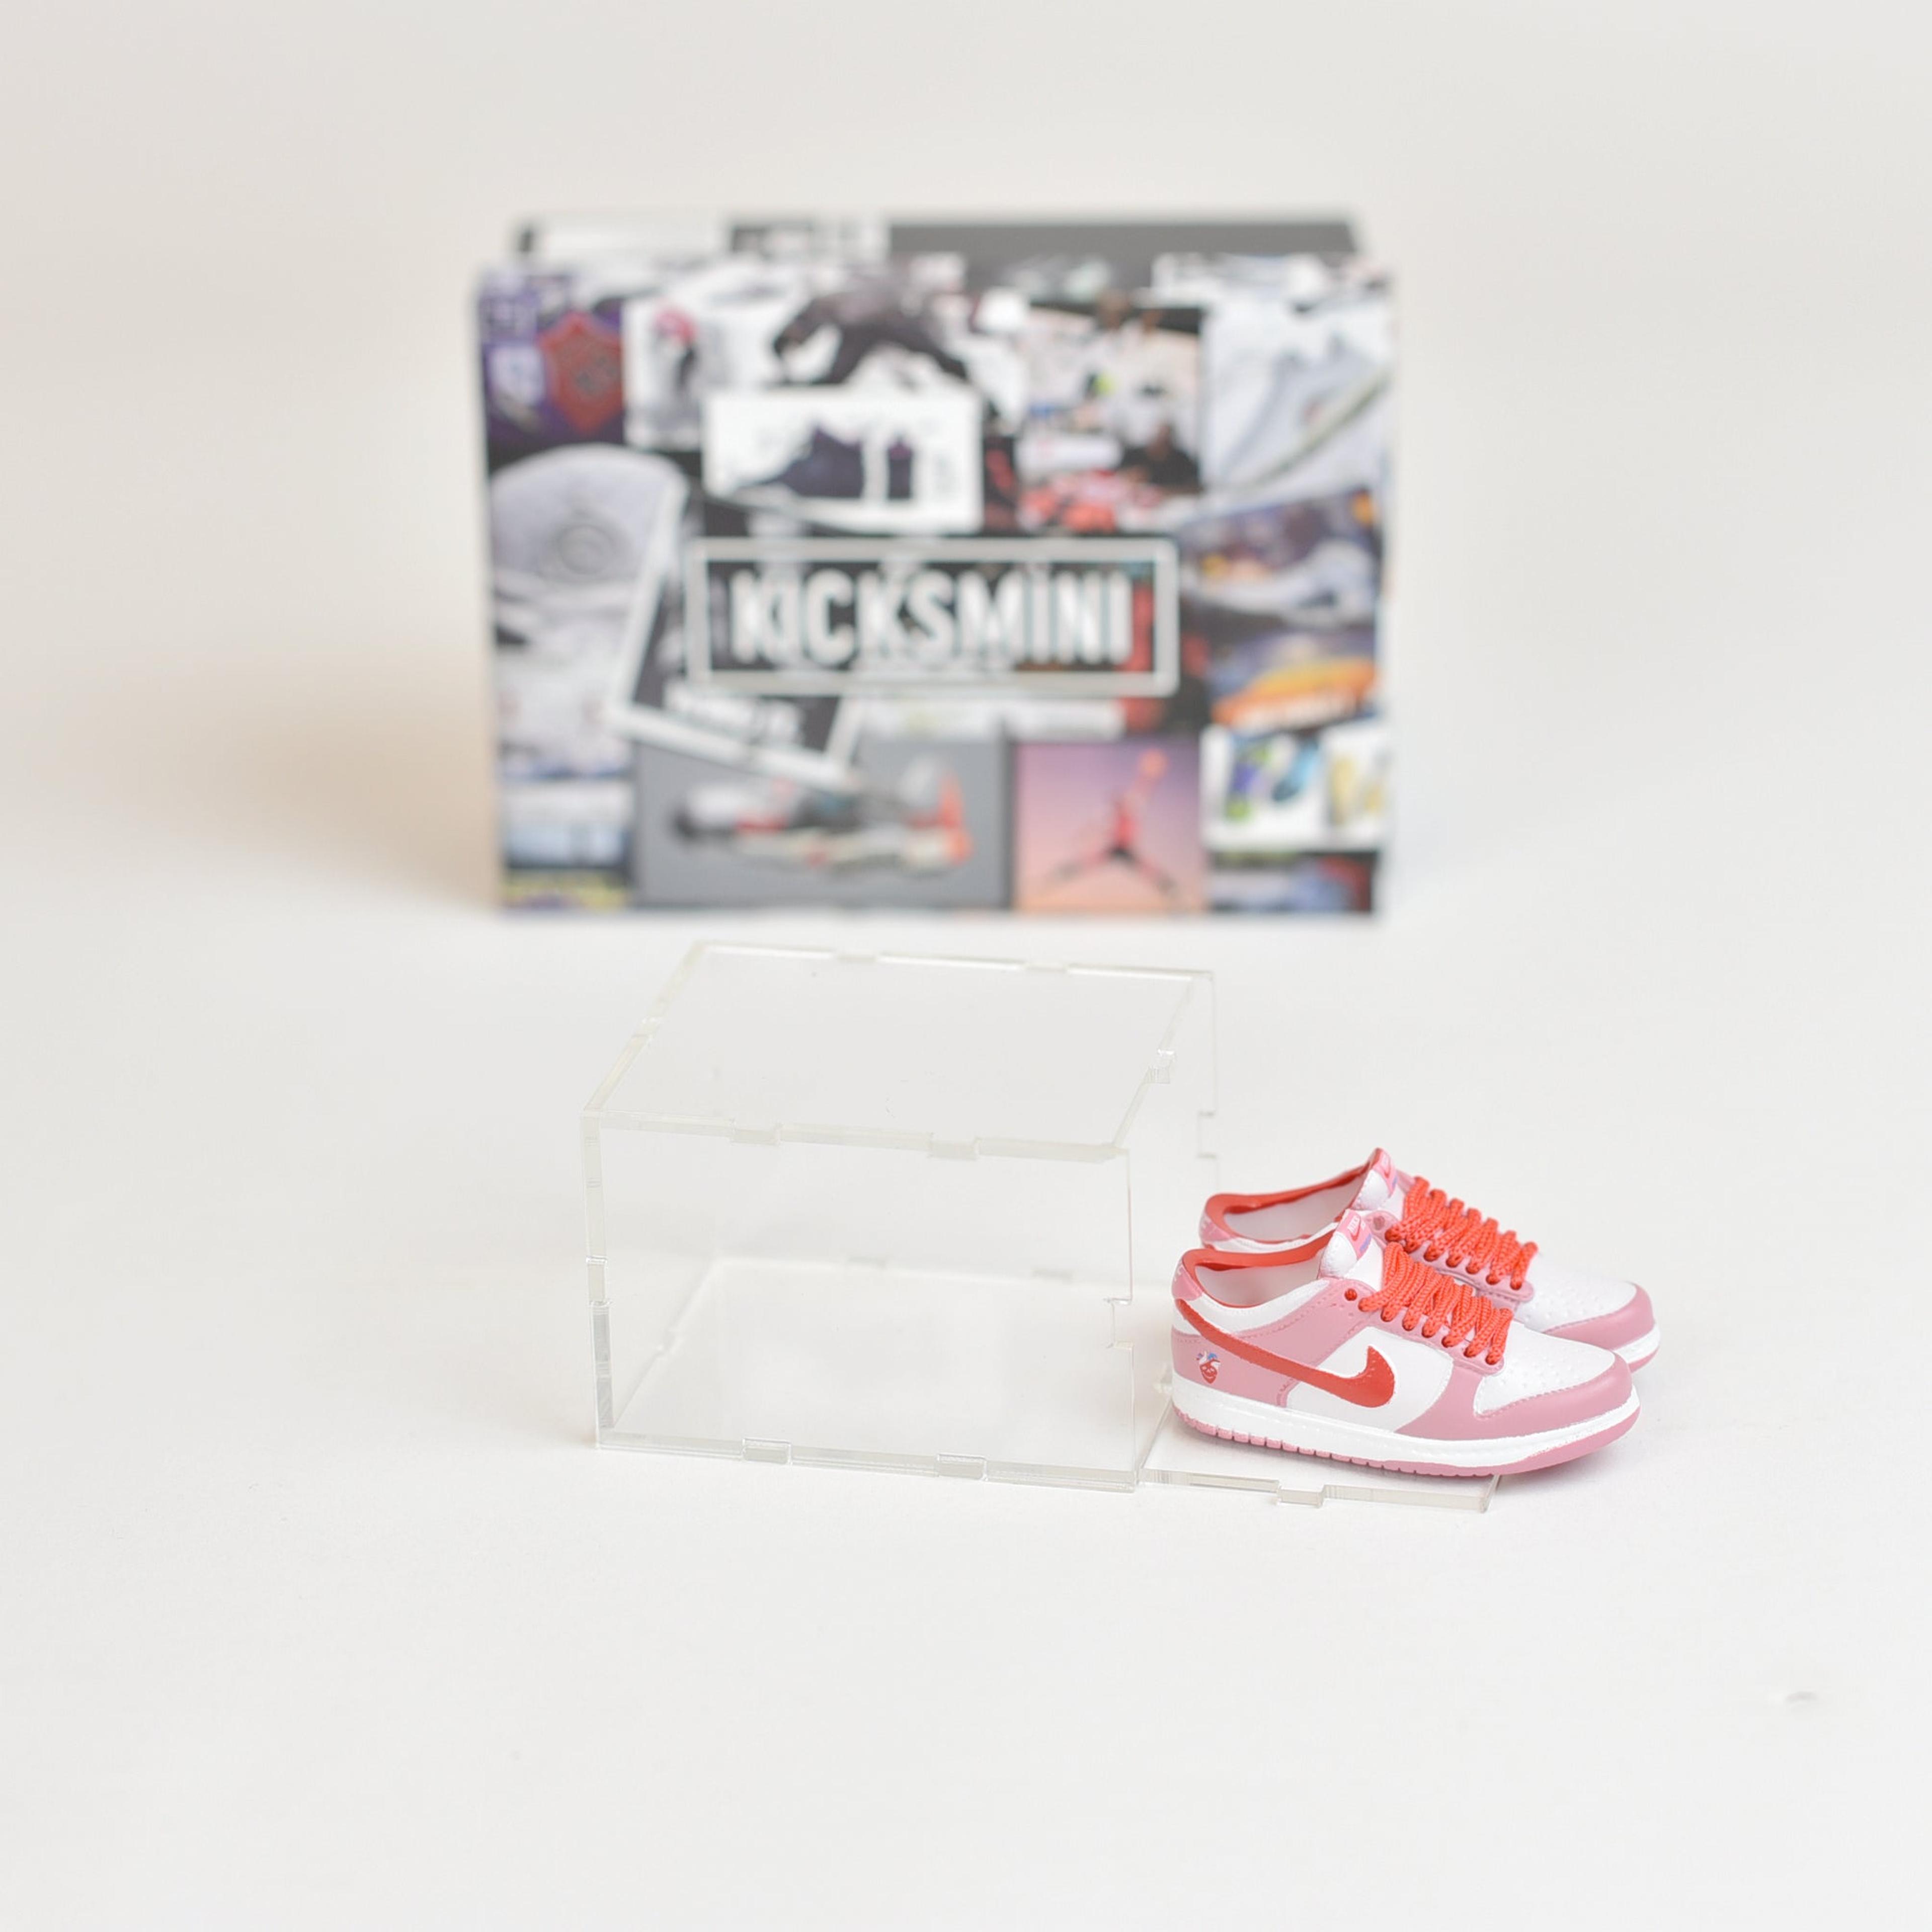 Alternate View 23 of SB Dunk Low Collaboration Mini Sneakers with Display Case